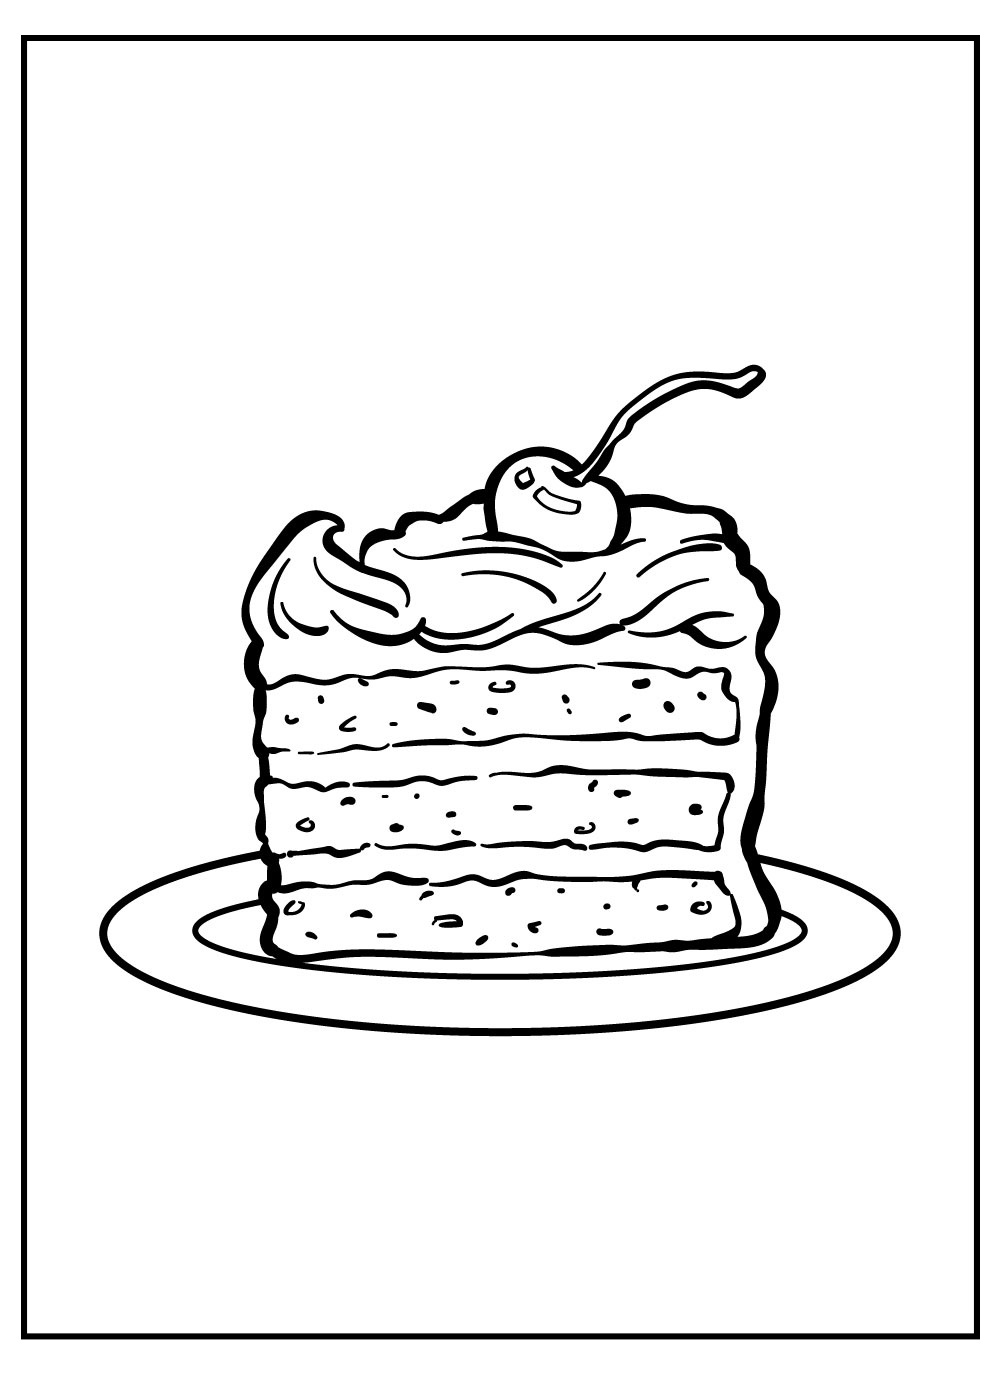 A Piece For Birthday Cake Coloring Page